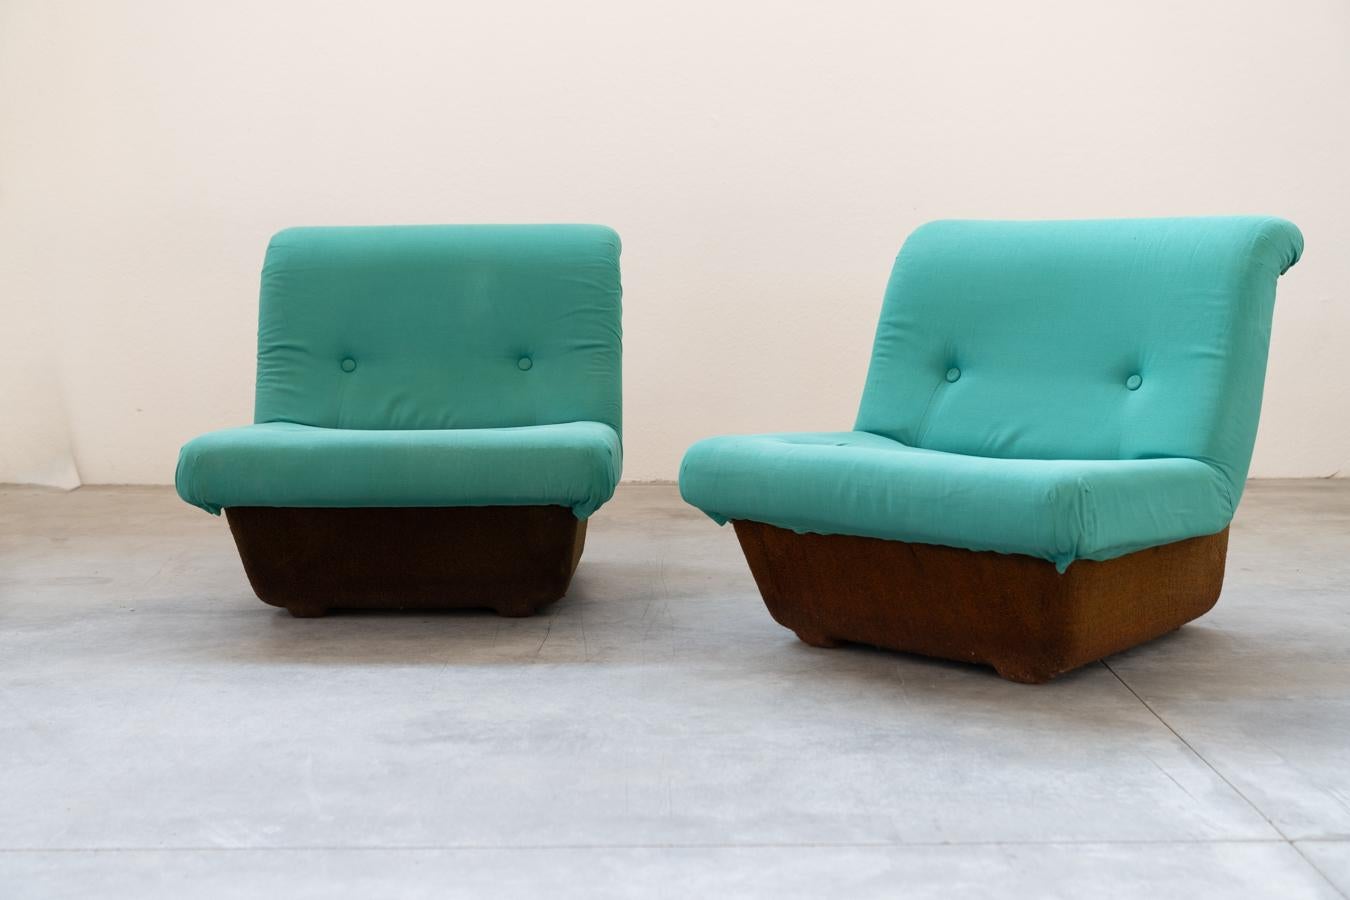 Set of two Lev & Lev fabric armchairs, removable covers, with fiberglass frame, 1970s.
Manufacturer: Lev & Lev
Attribution Mark: This piece has an attribution mark, I am confident that it is completely authentic and I take full responsibility for